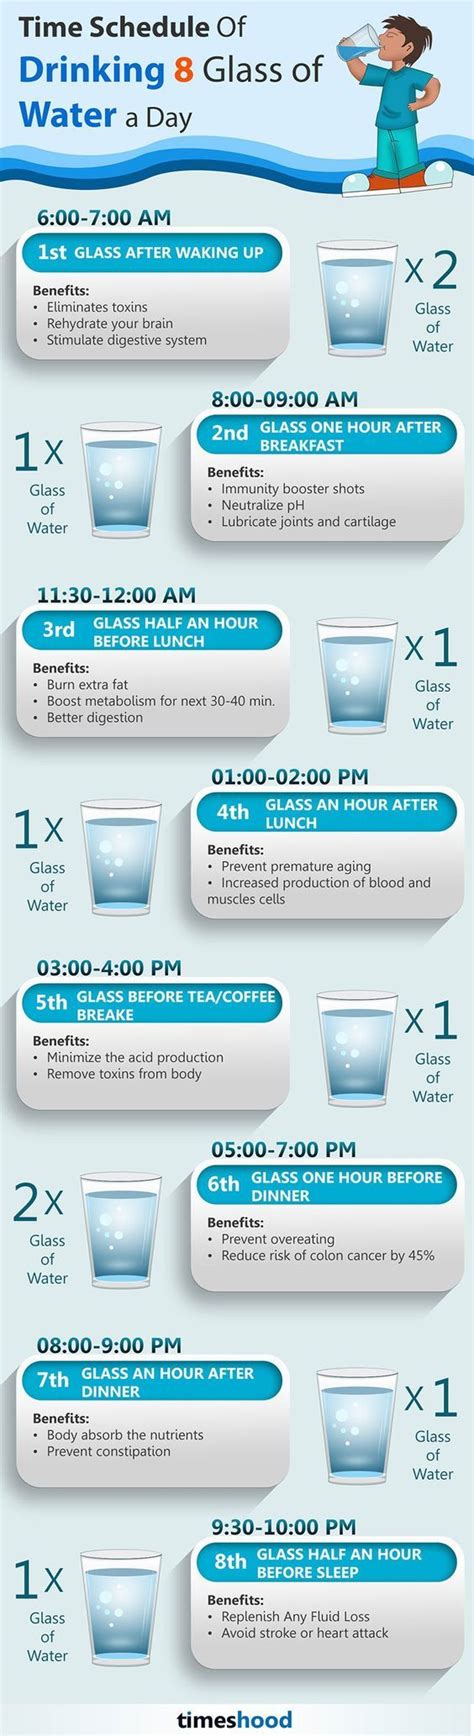 Healthy Time Schedule Of Drinking 8 Glass Of Water A Day With Benefits